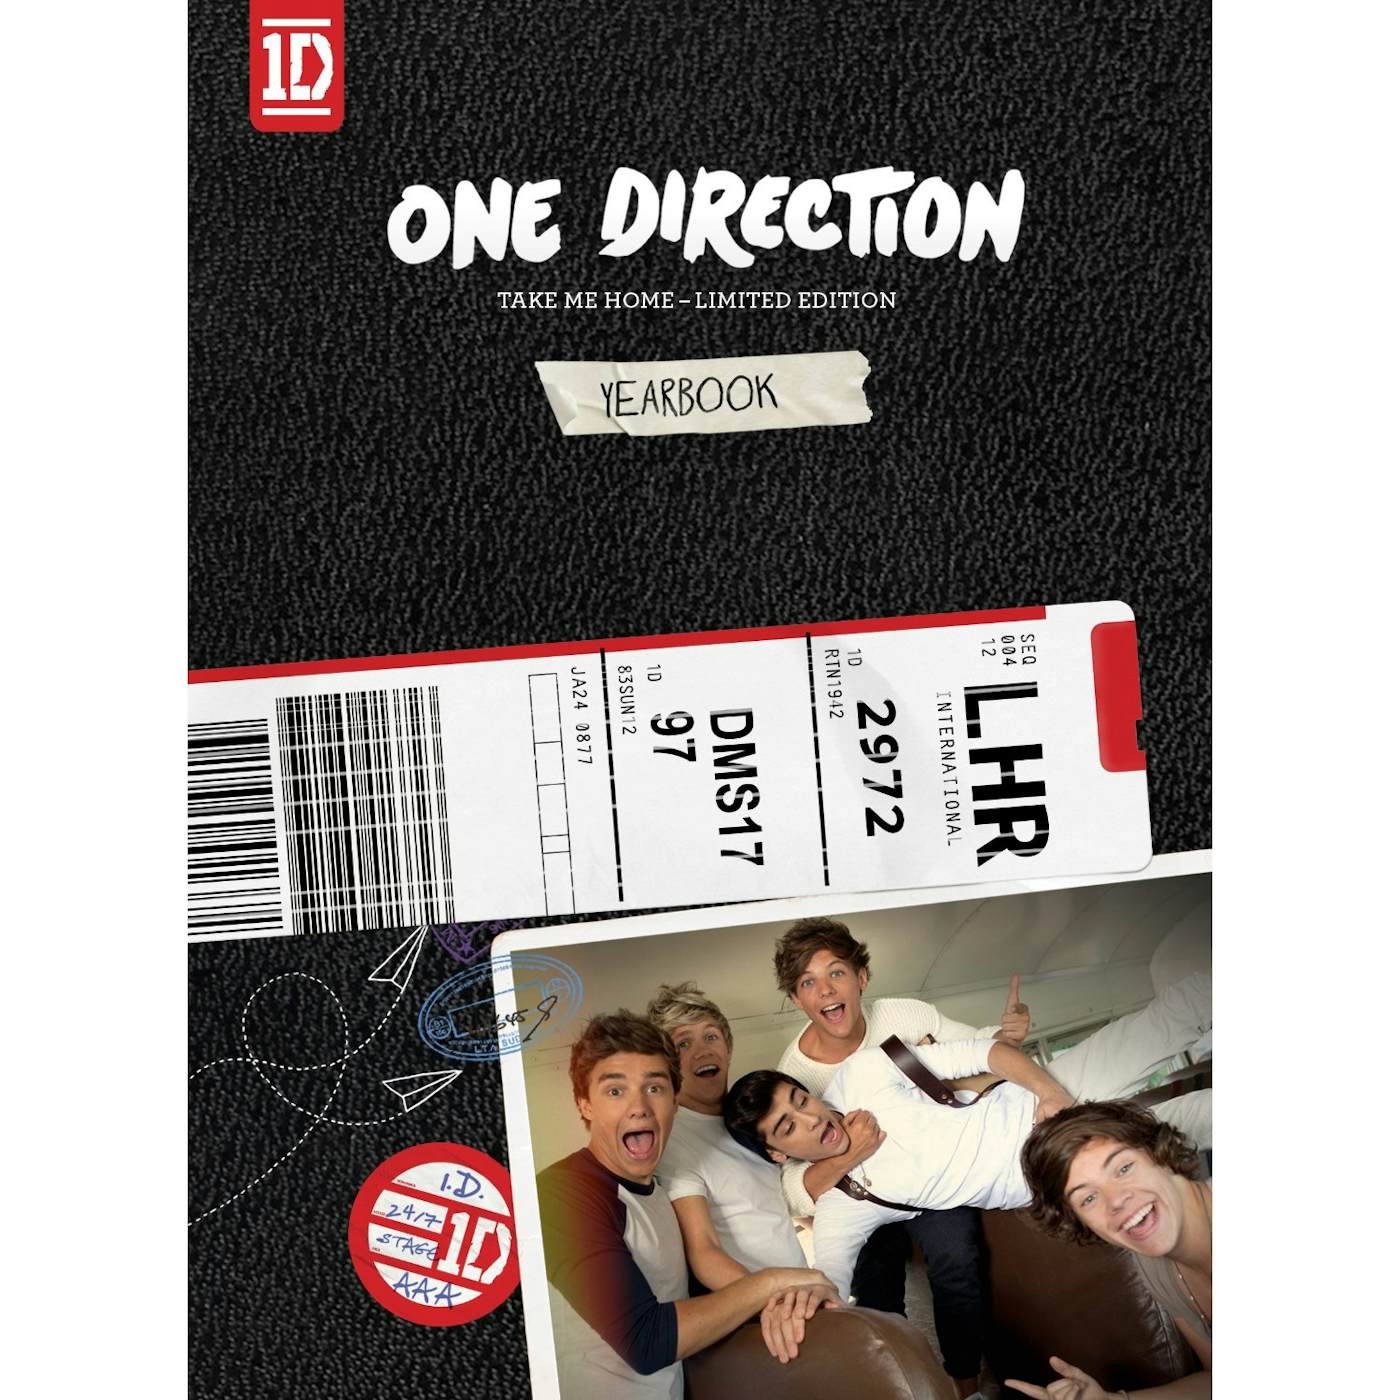 One Direction TAKE ME HOME: YEARBOOK EDITION (EUROPEAN) CD